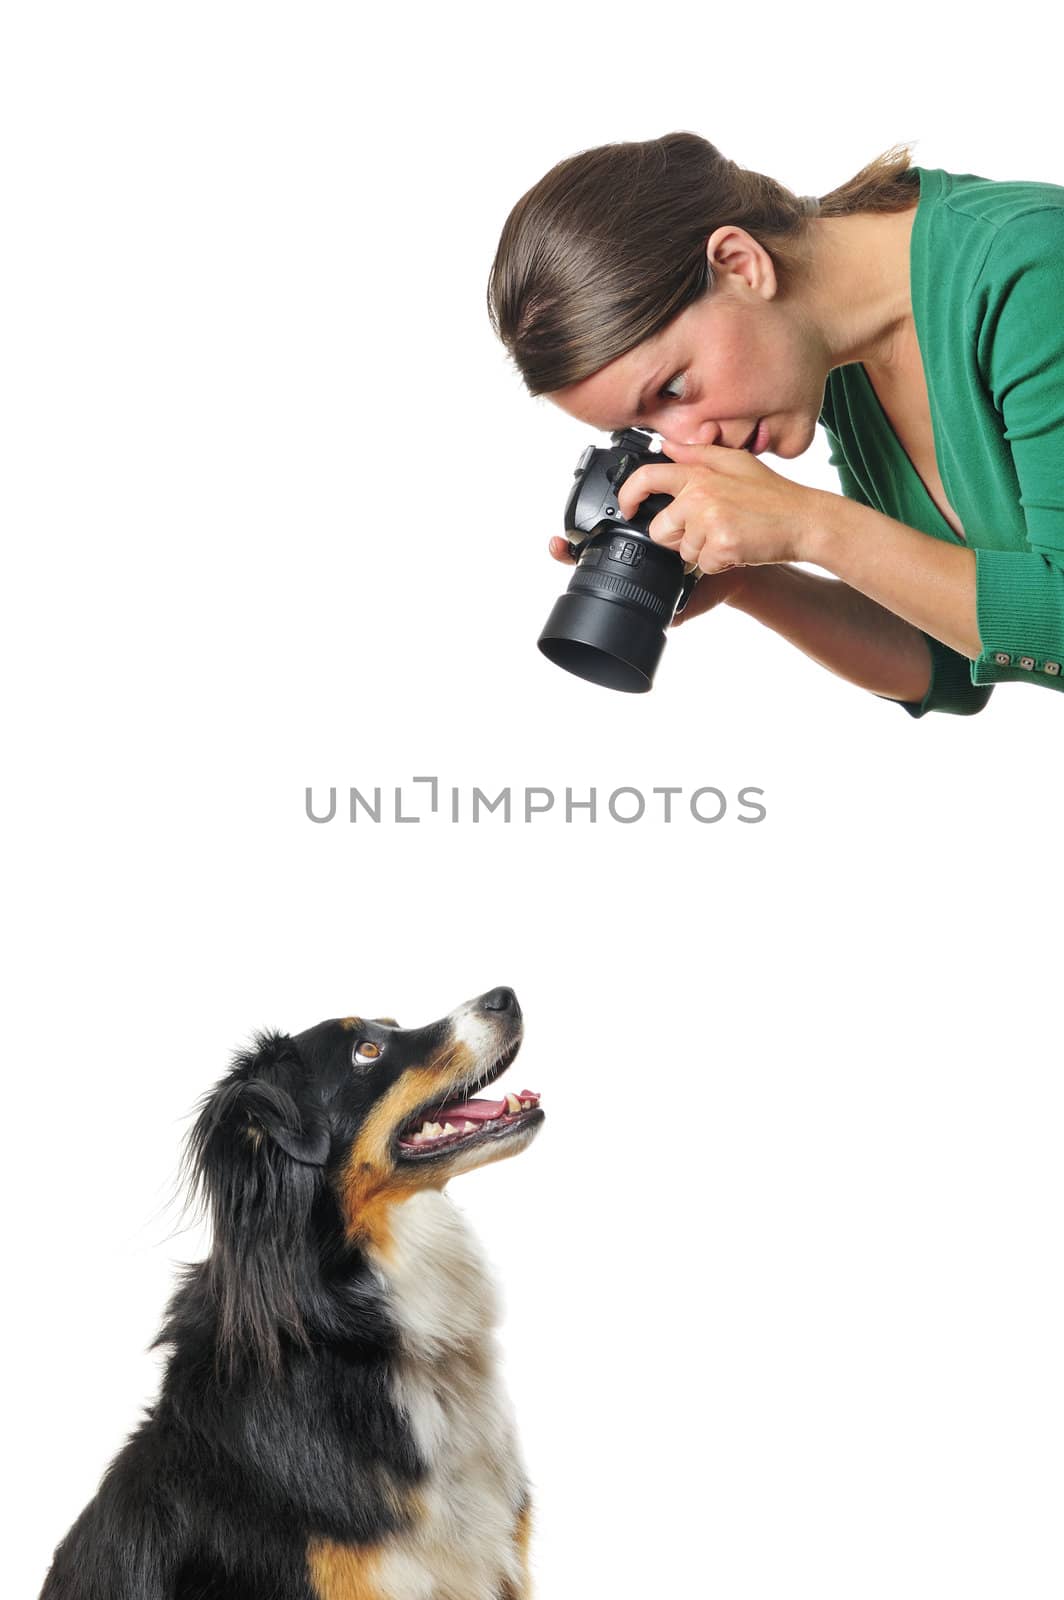 A young woman taking photographs of a willing dog, isolated on white. Space for text.